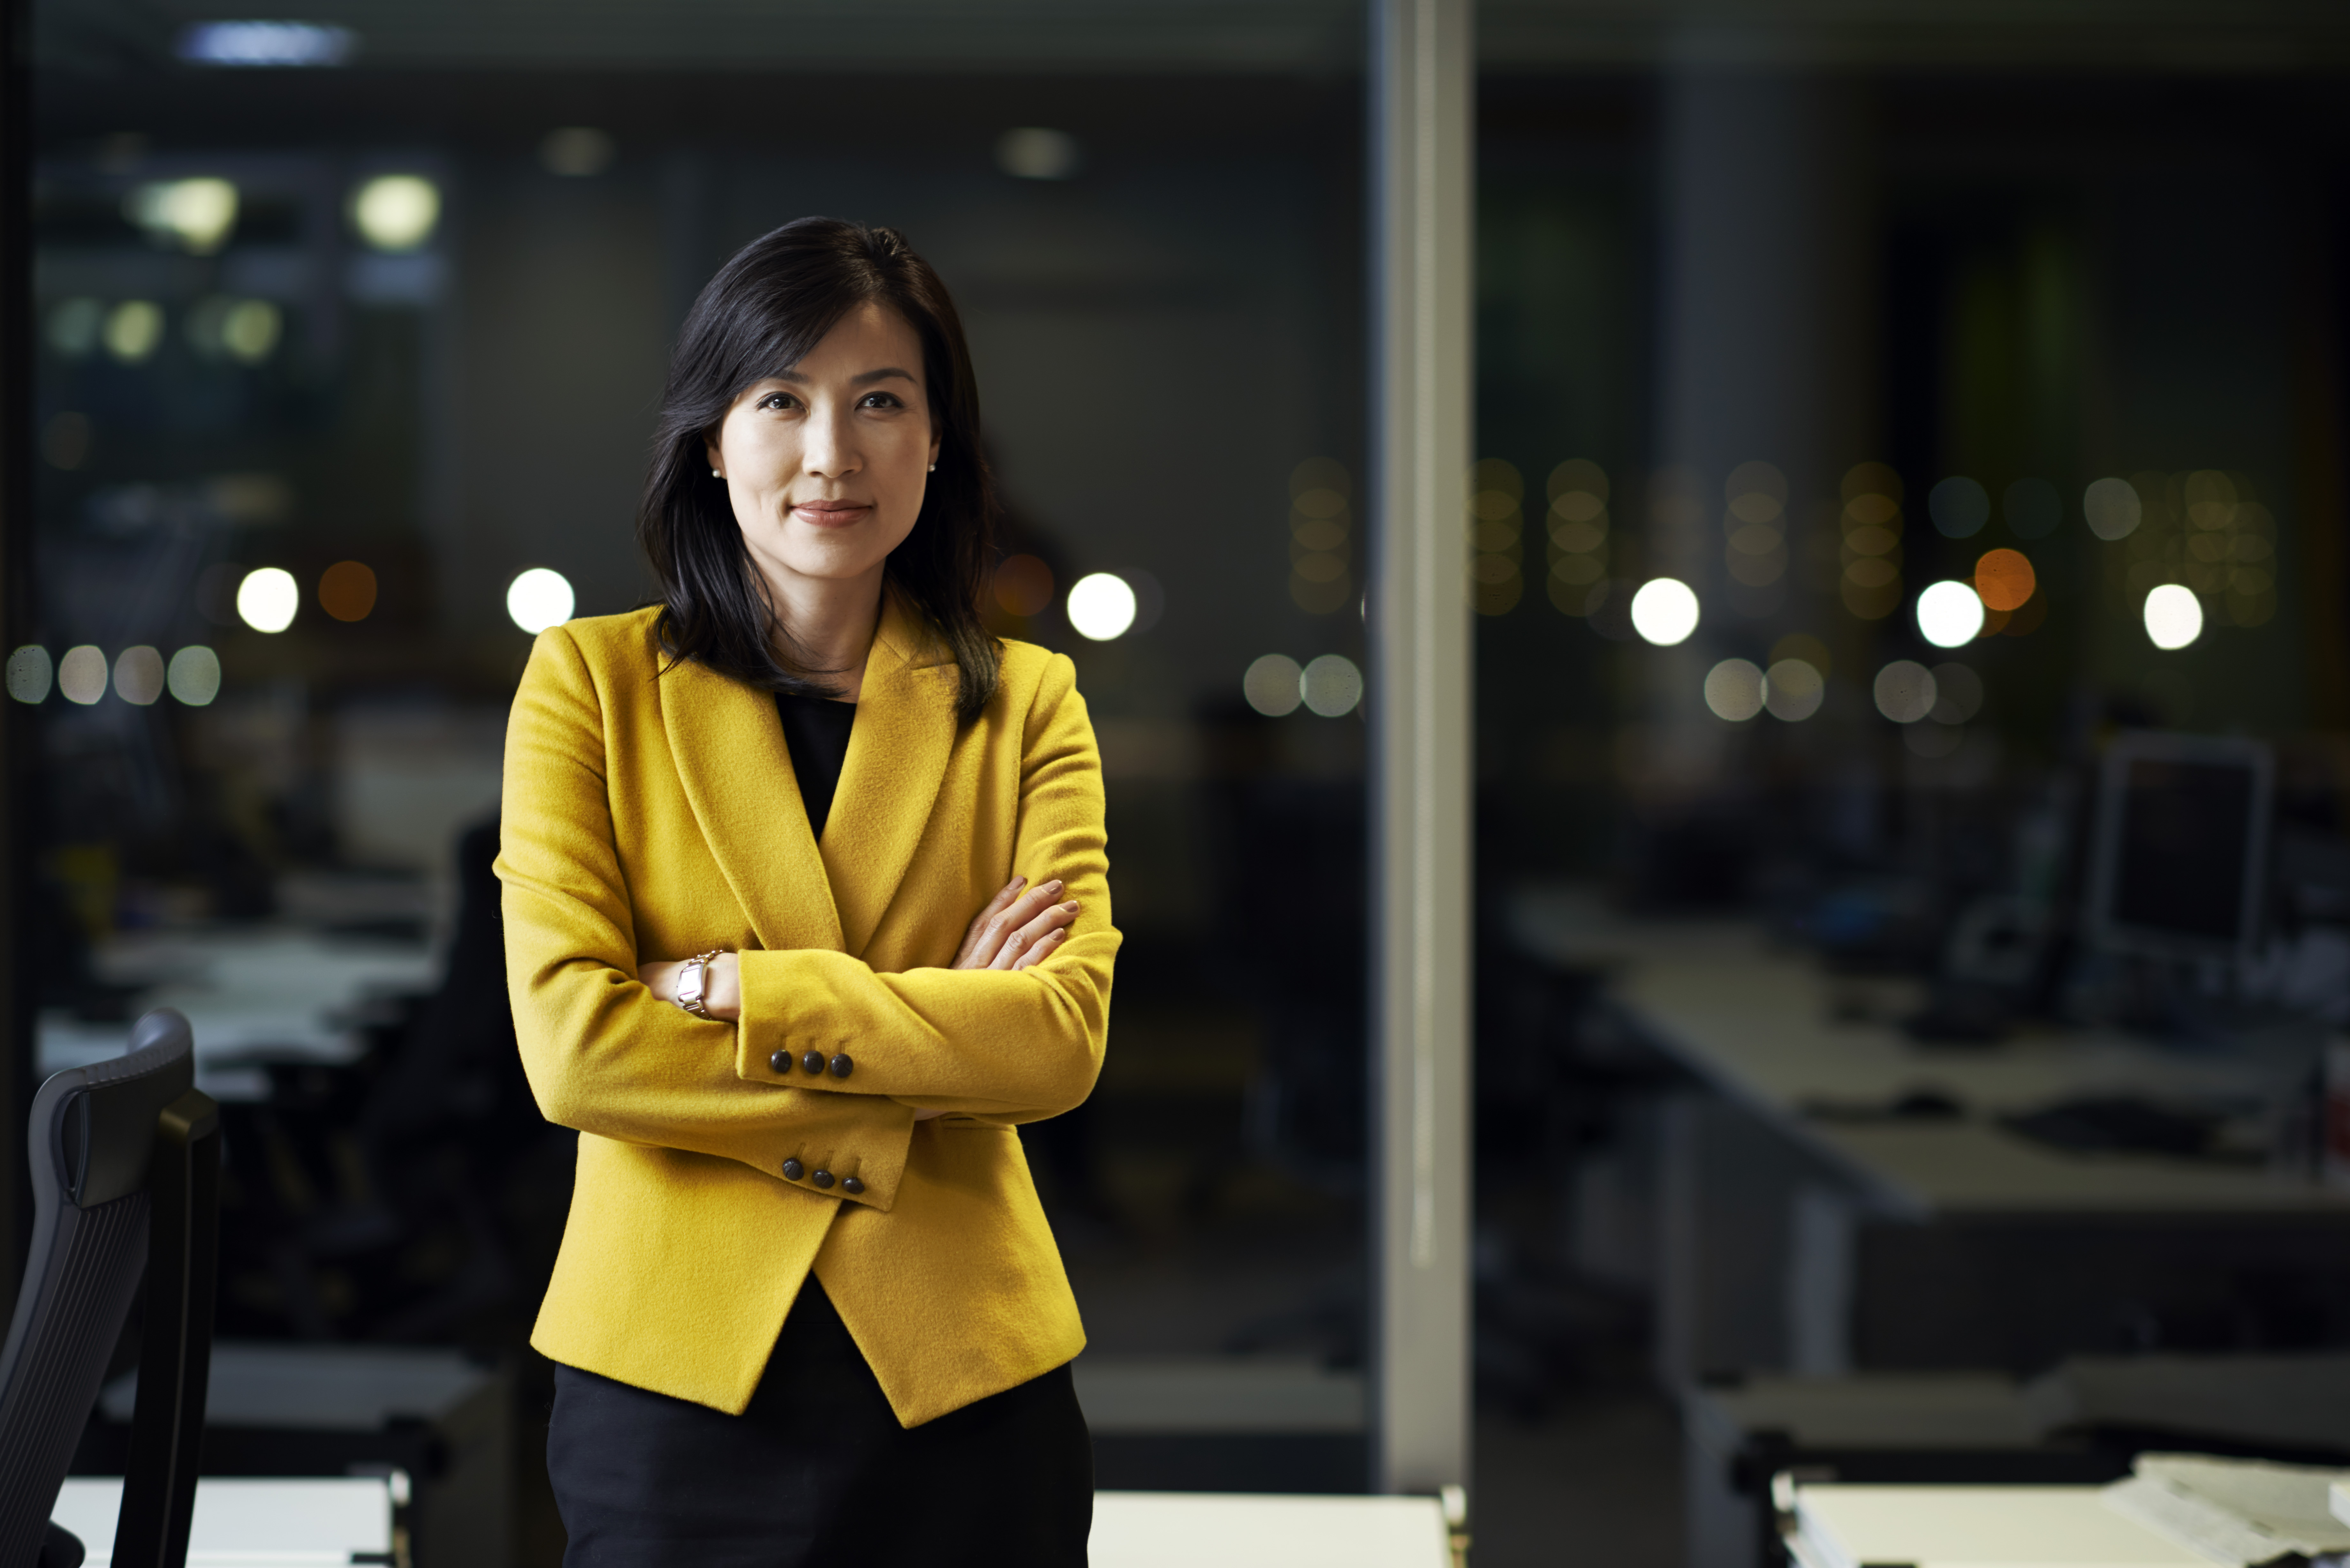 A corporate woman standing in office at night